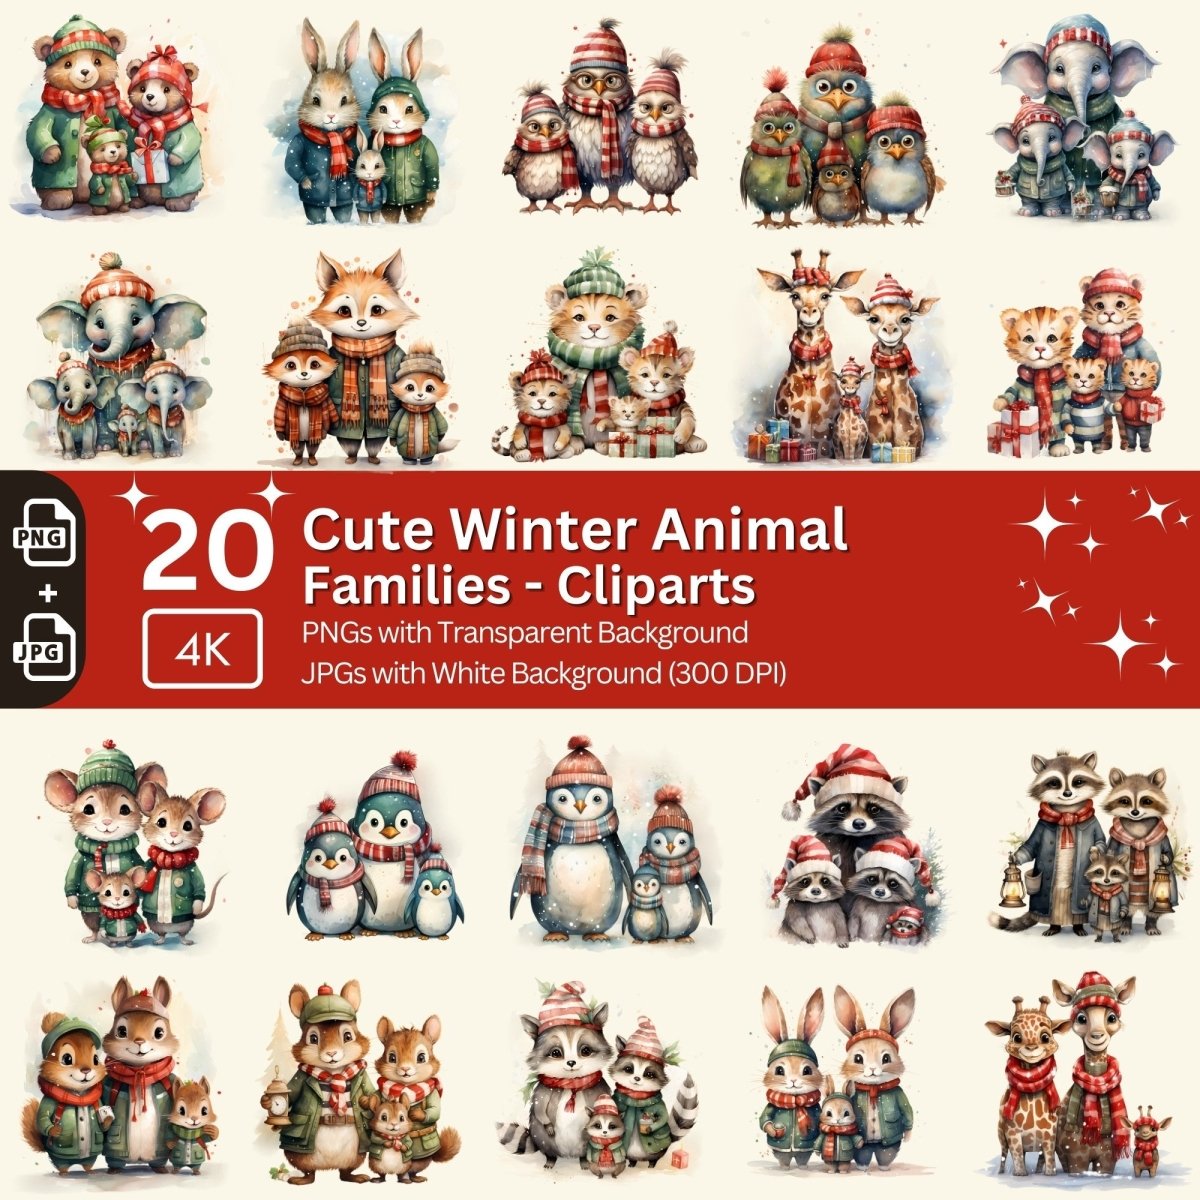 Cute Winter Animal Families Clipart 20 PNG Bundle Christmas Watercolor Images Seasonal Children Book Illustrations Card Making Xmas Family - Everything Pixel